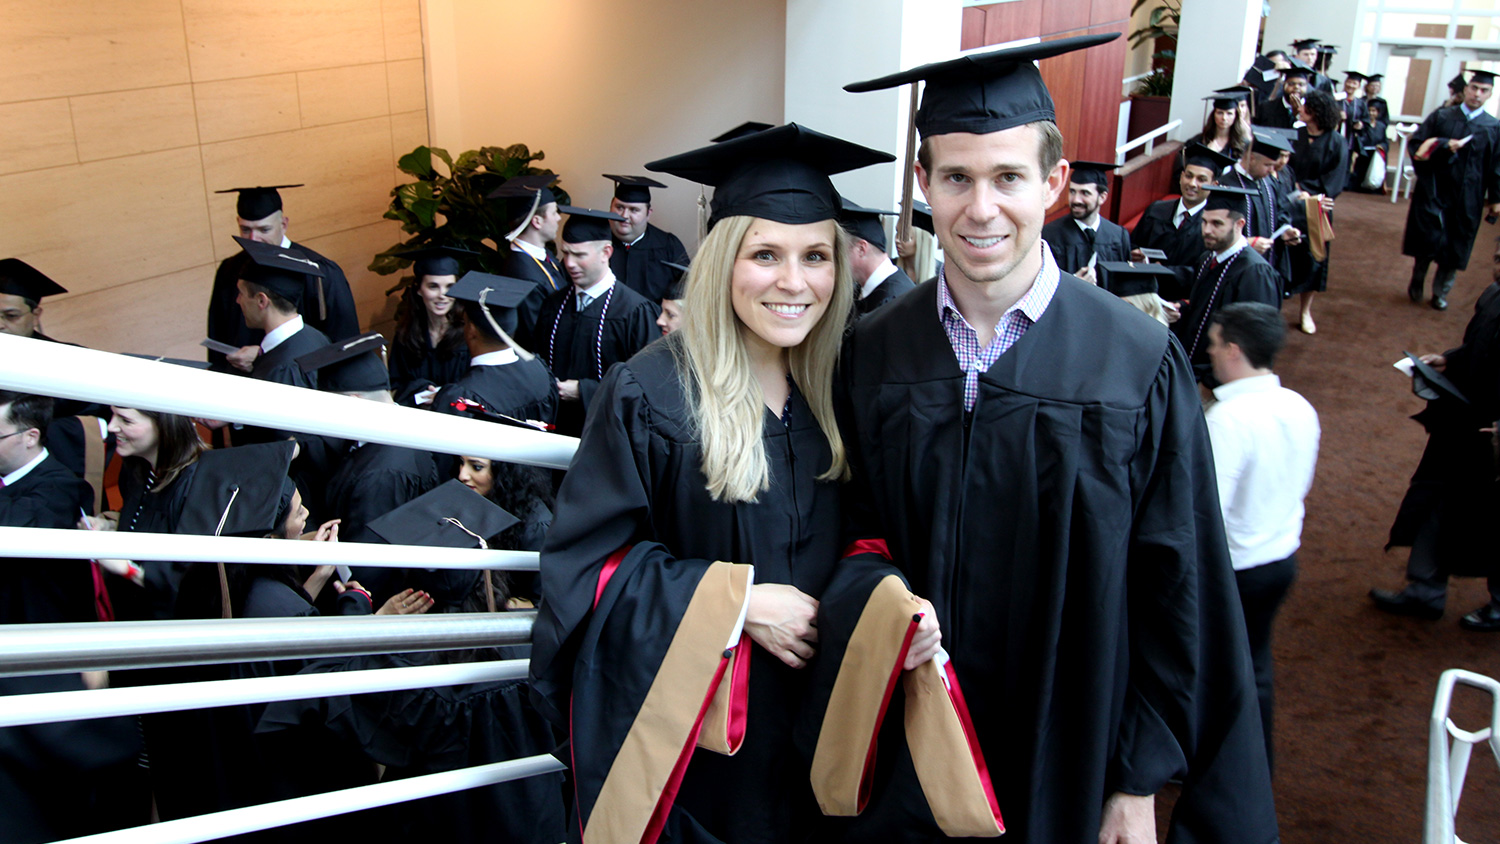 Nicole and Robert Panor with their graduate hoods prior to lining up for the Jenkins MBA Hooding Ceremony.